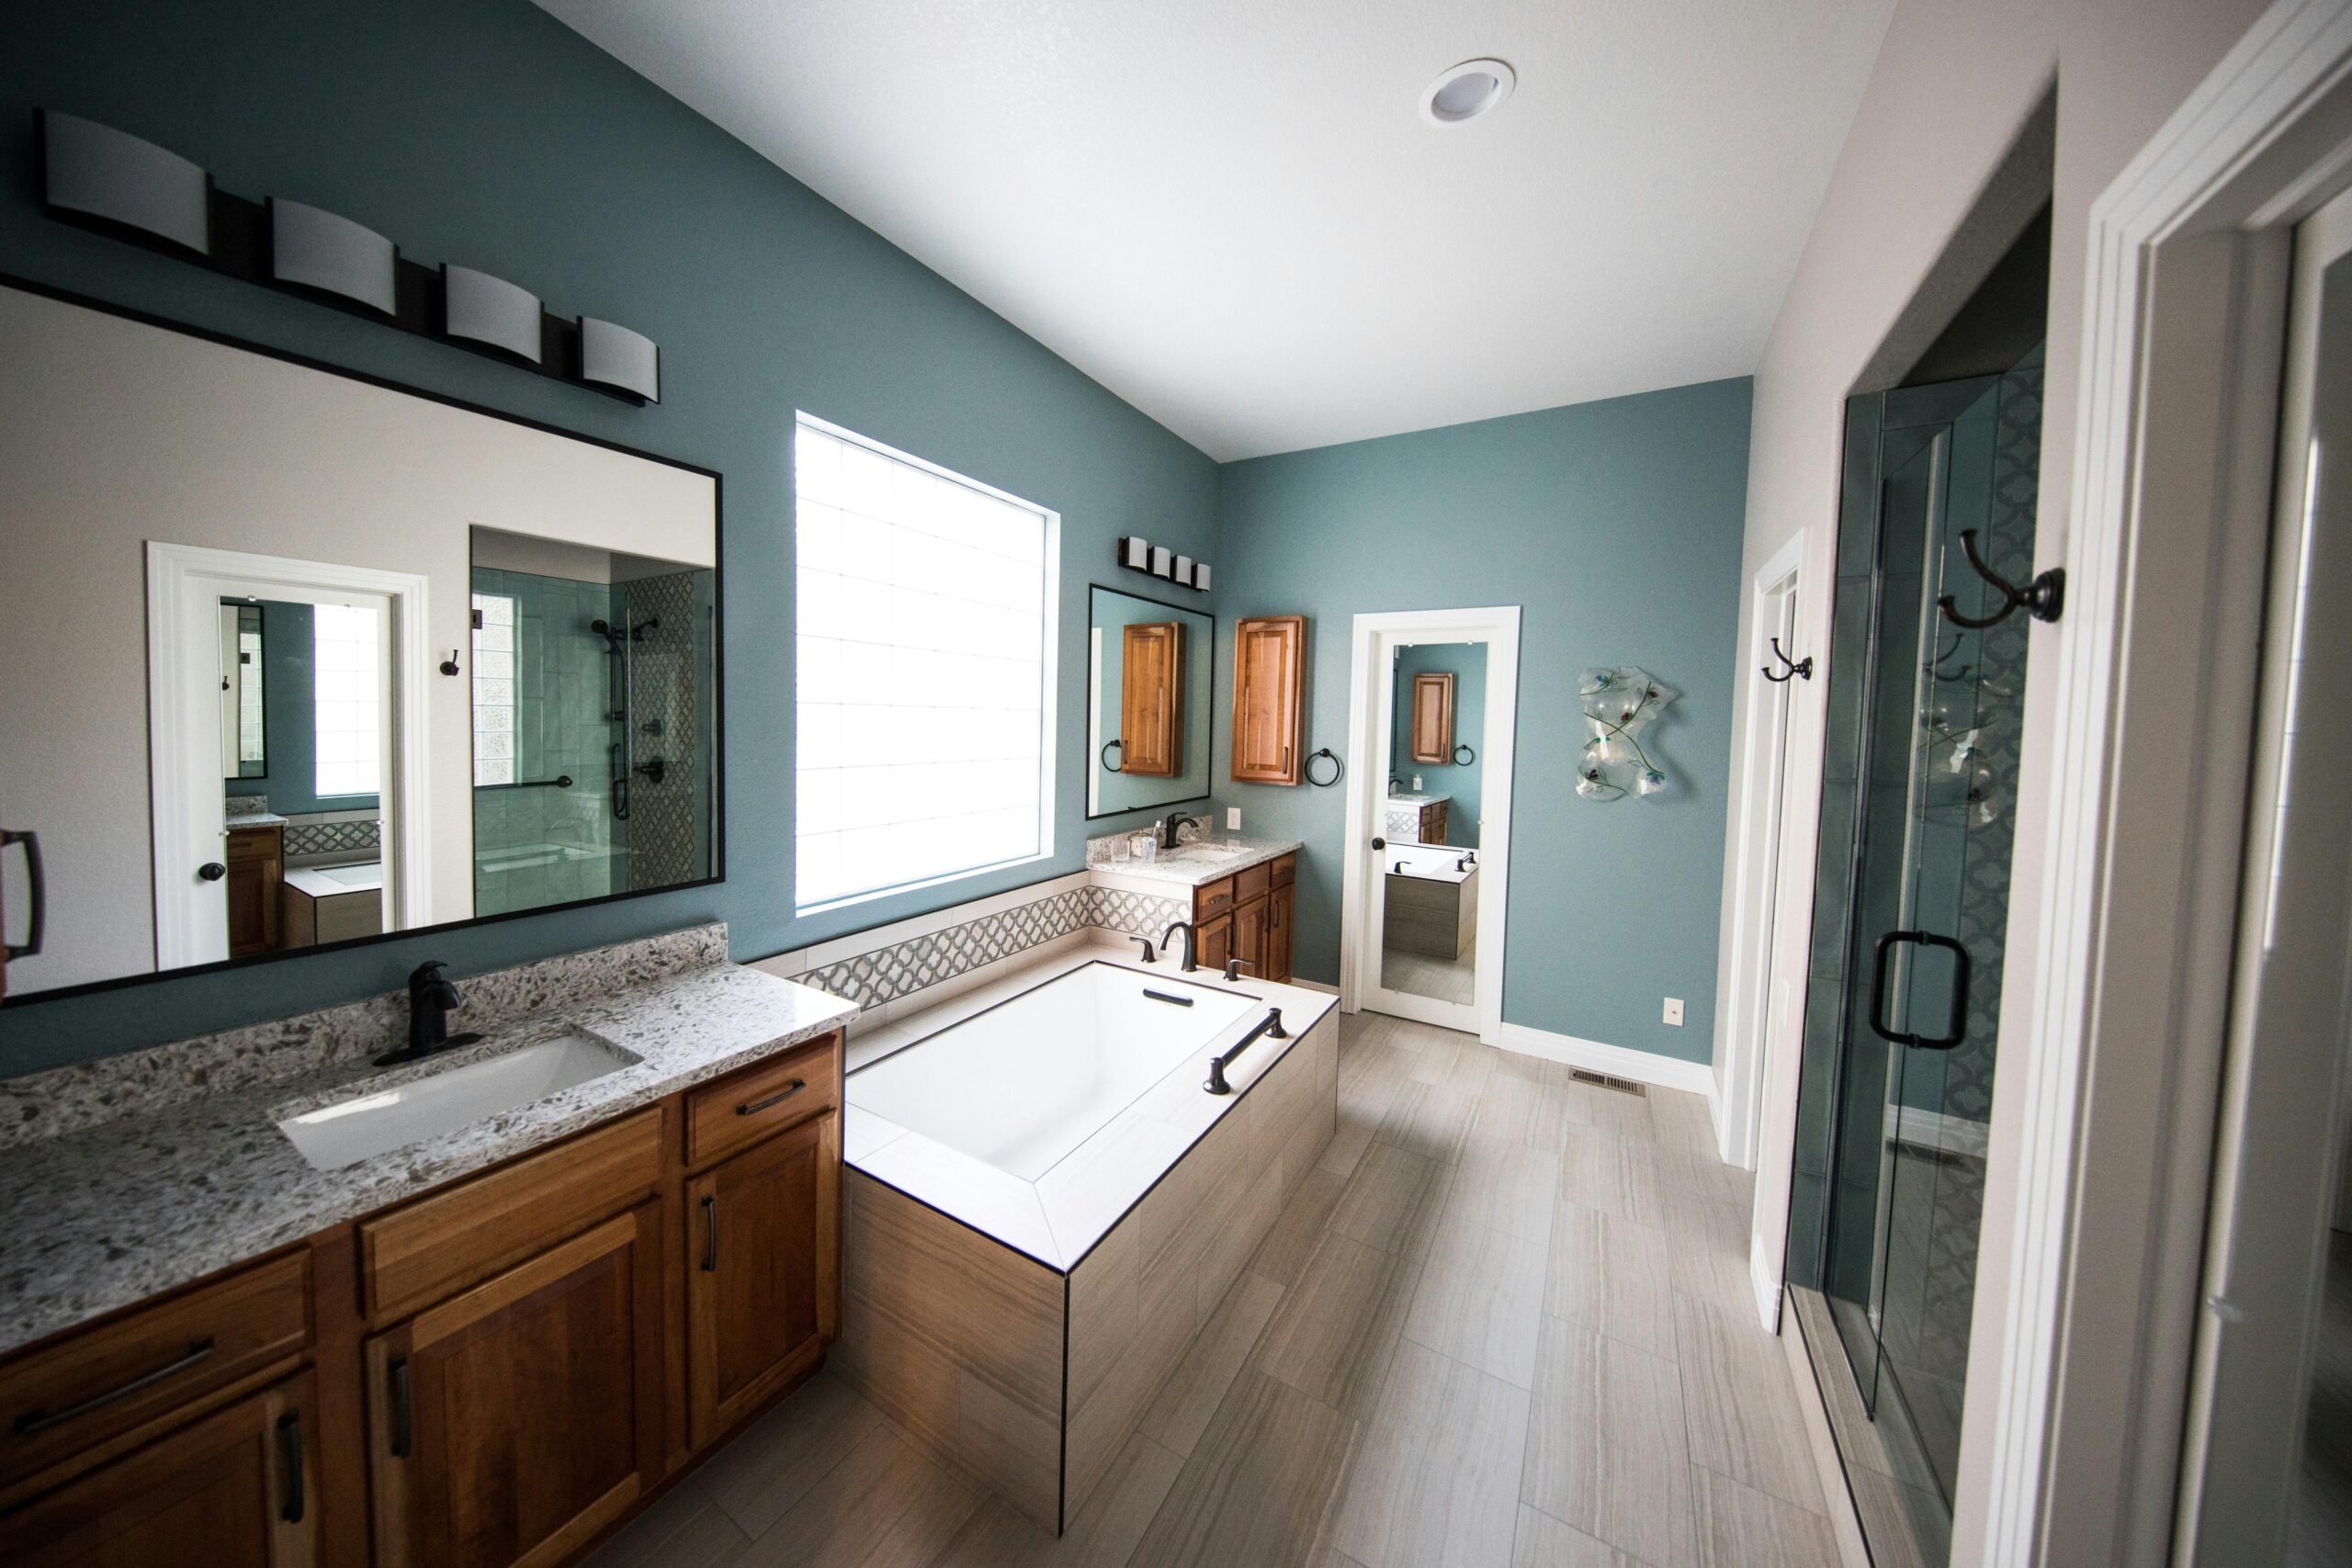 What To Know Before Starting a Bathroom Remodeling Project